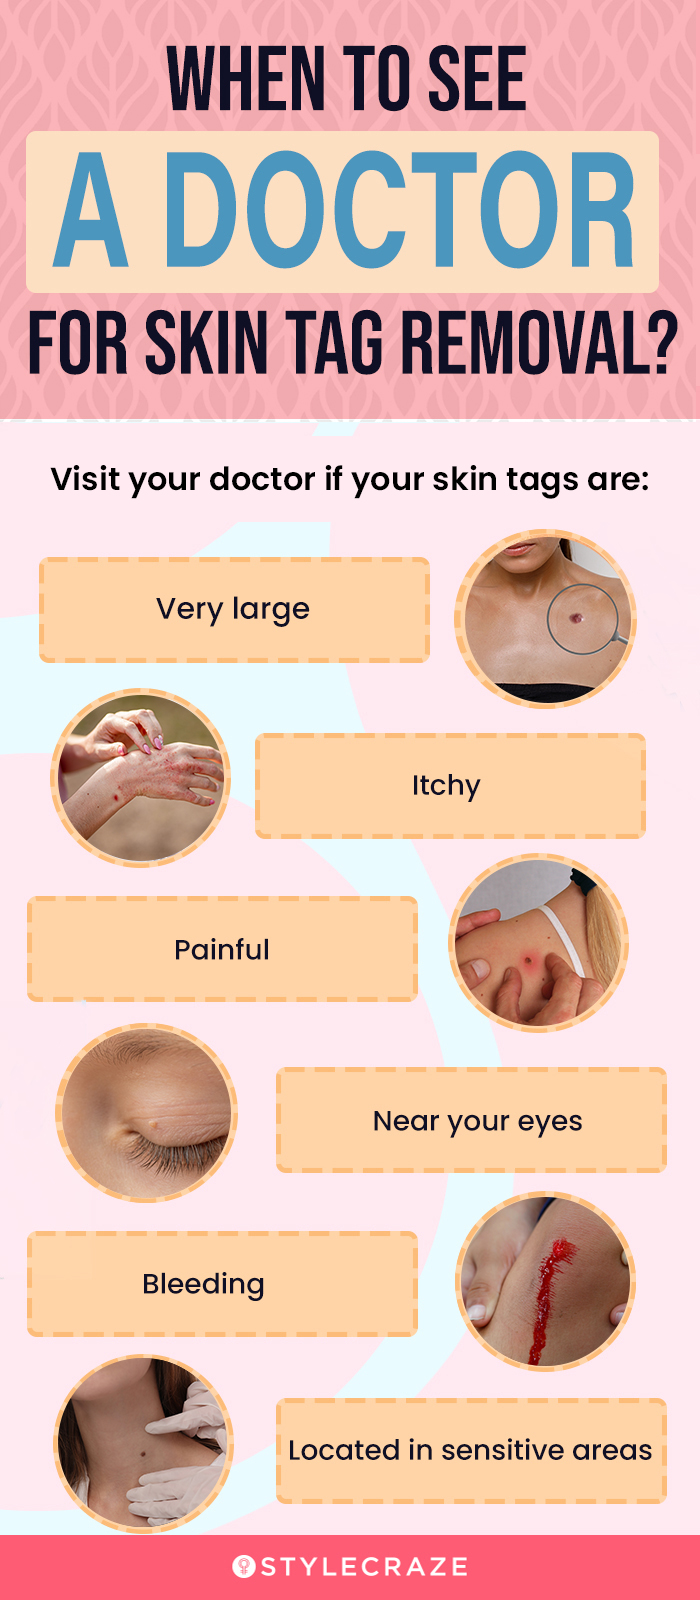 when to see a doctor for skin tag removal (infographic)